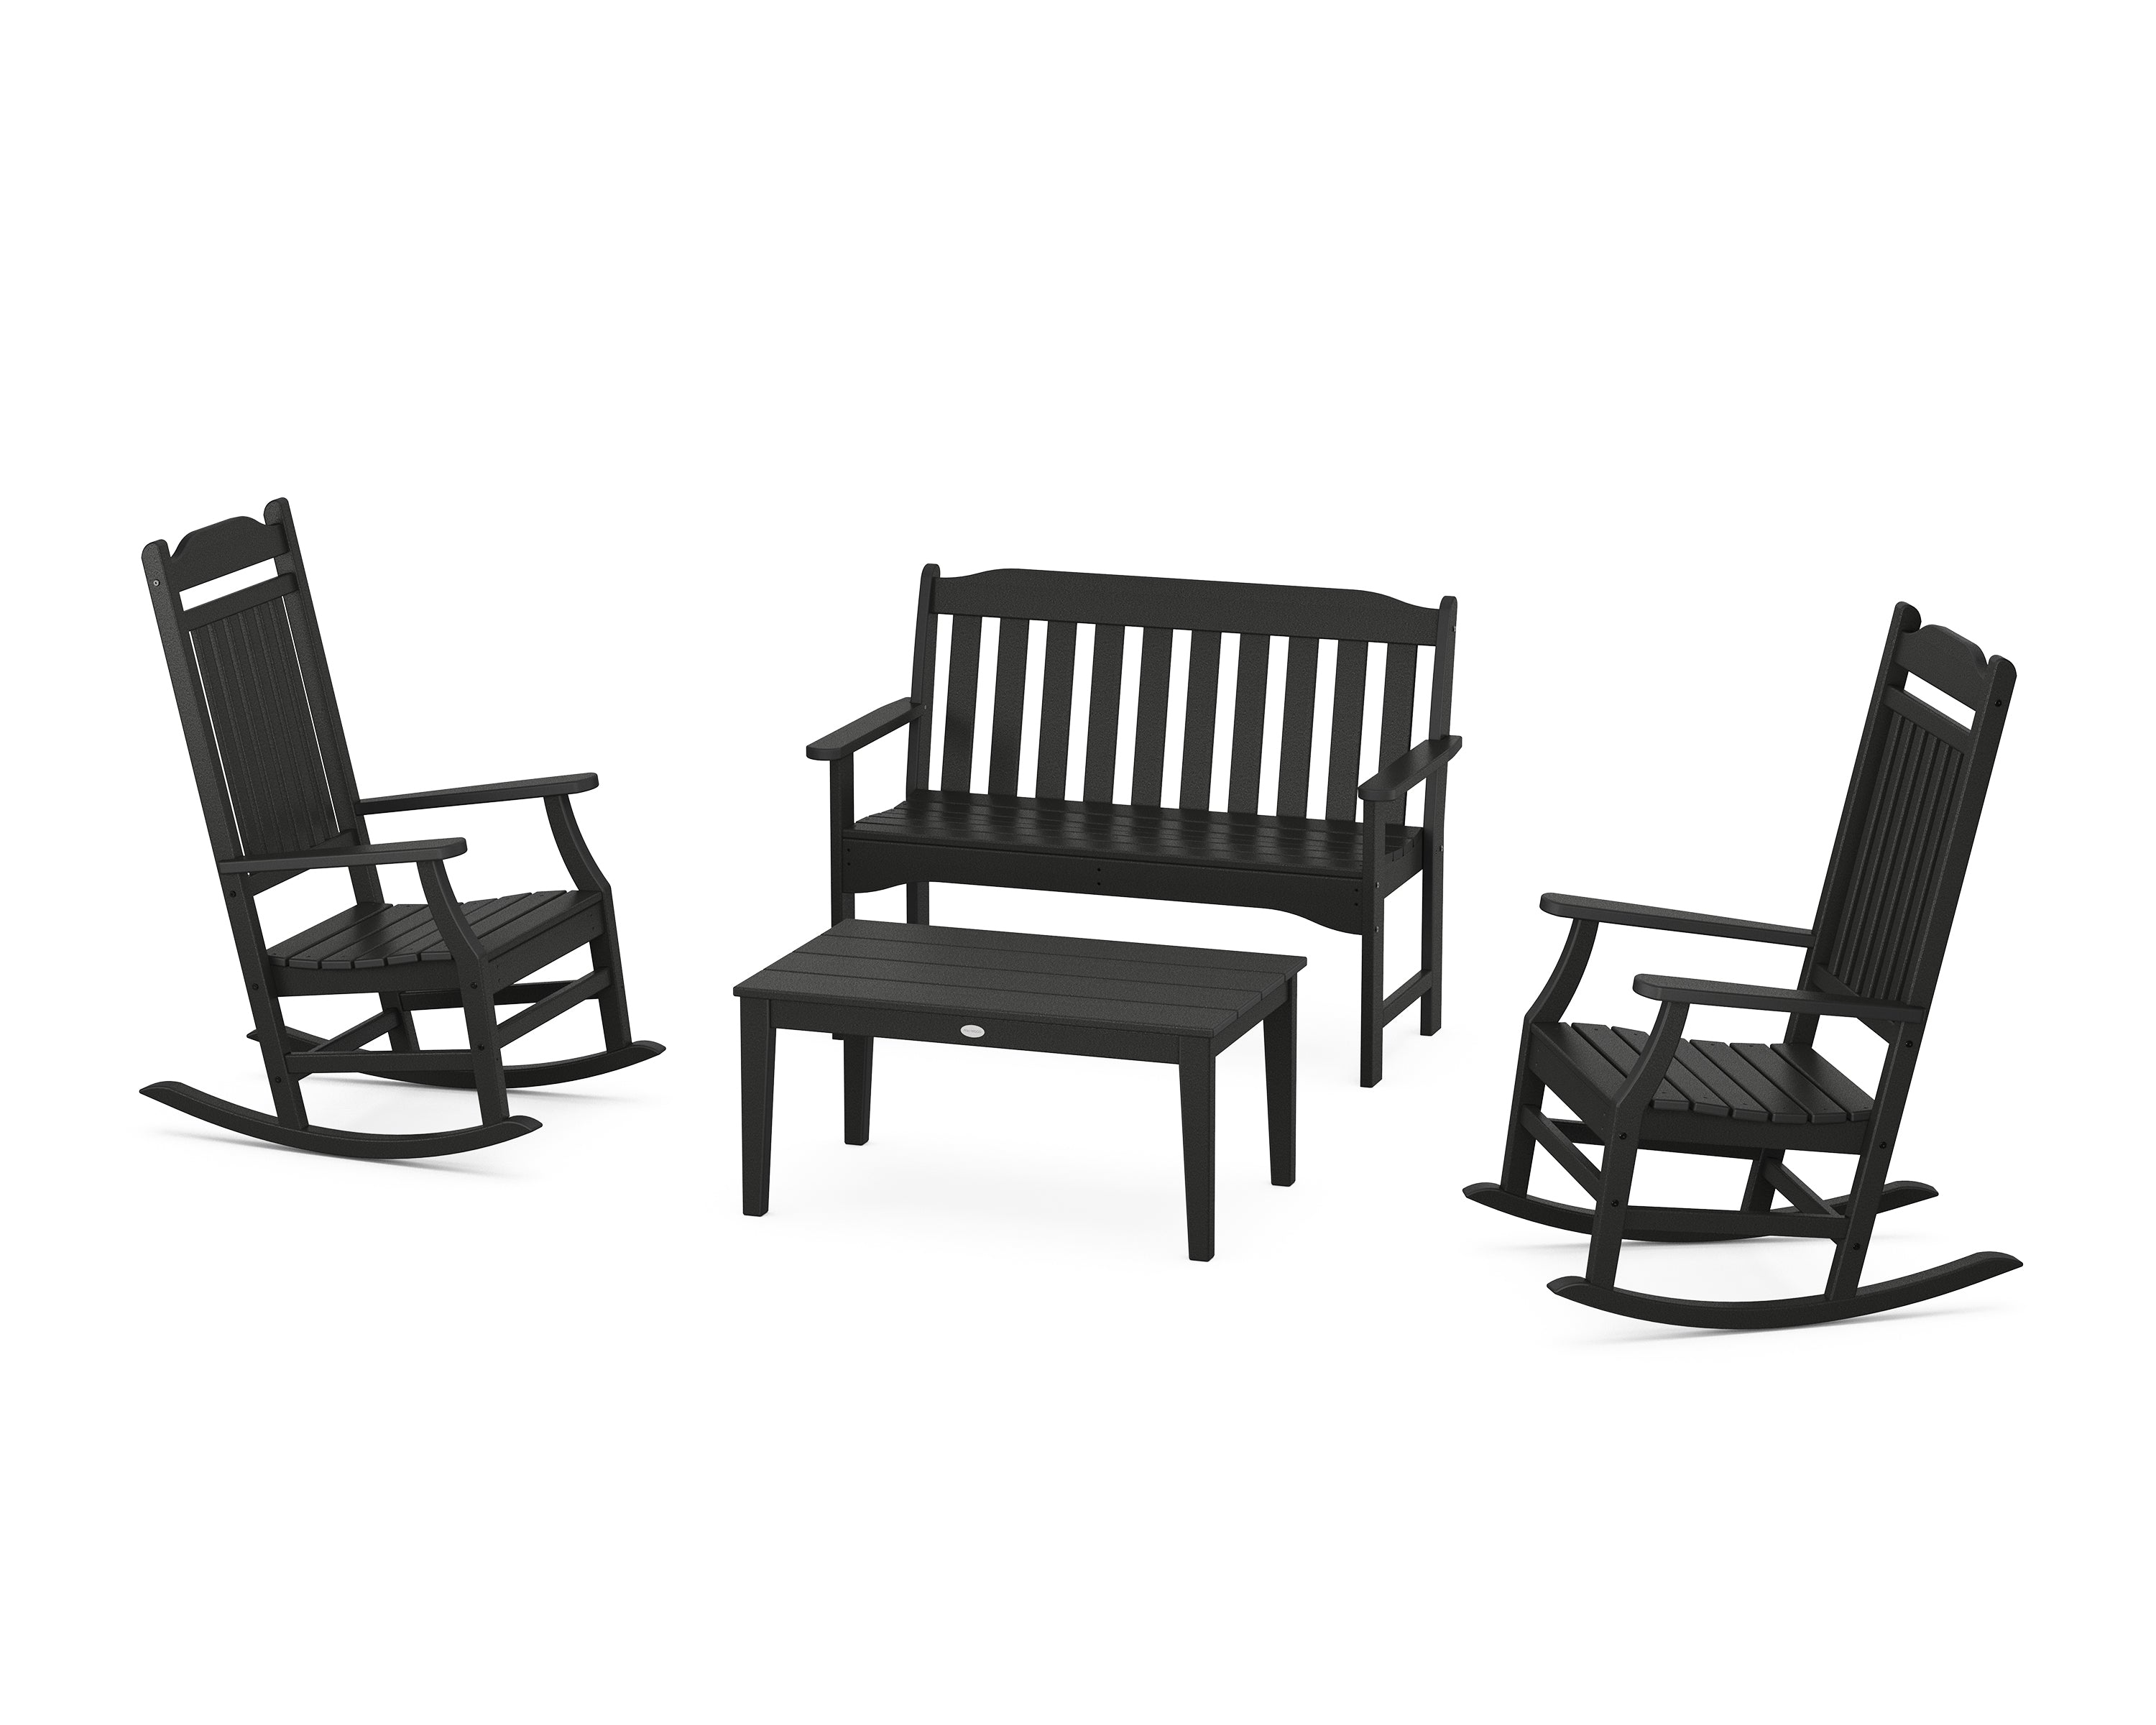 POLYWOOD Country Living Rocking Chair 4-Piece Porch Set in Black